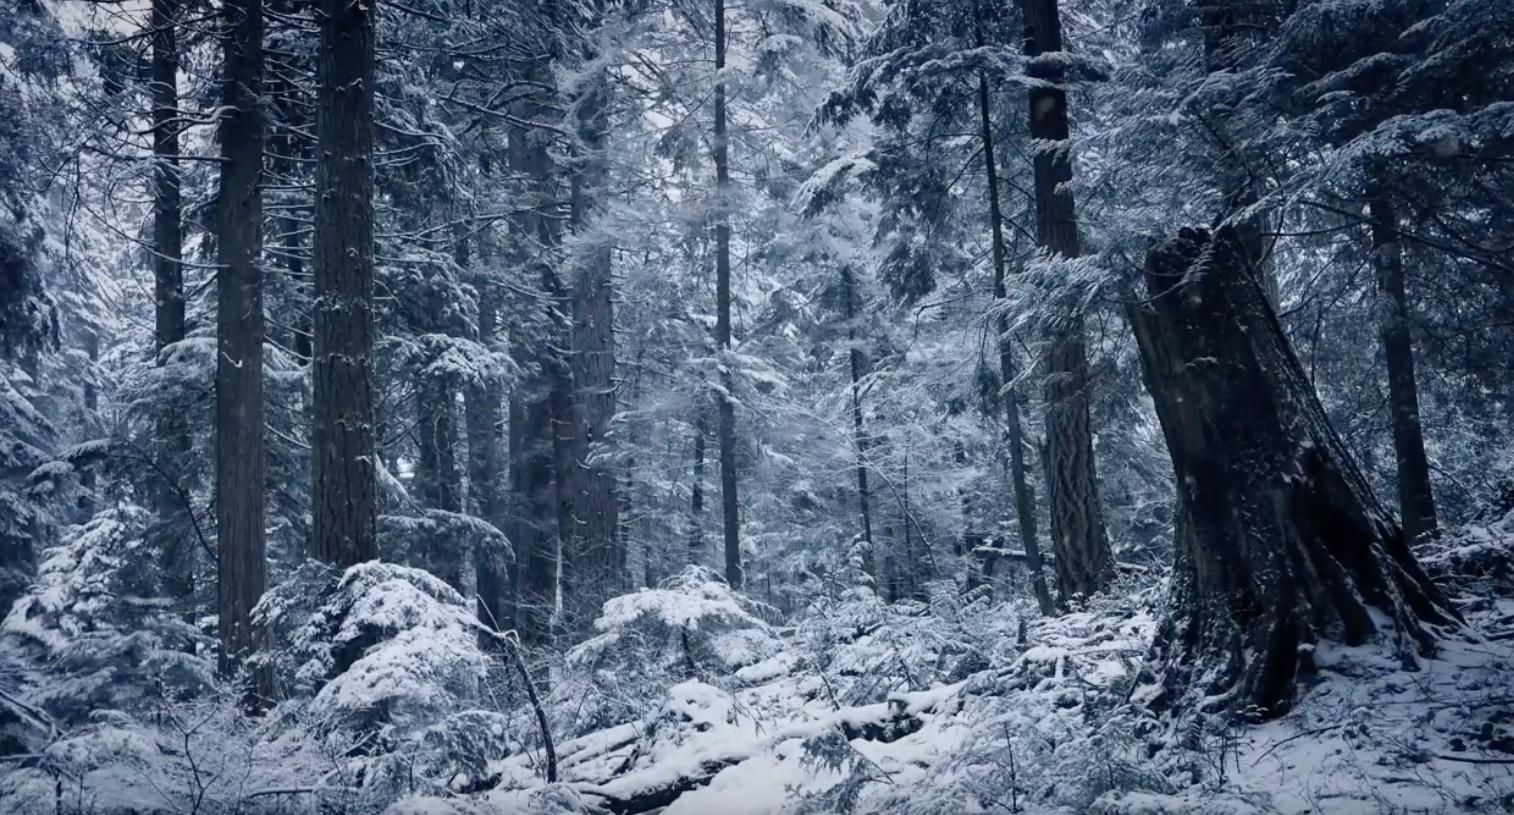 Snow in the winter forest live wallpaper [DOWNLOAD FREE]